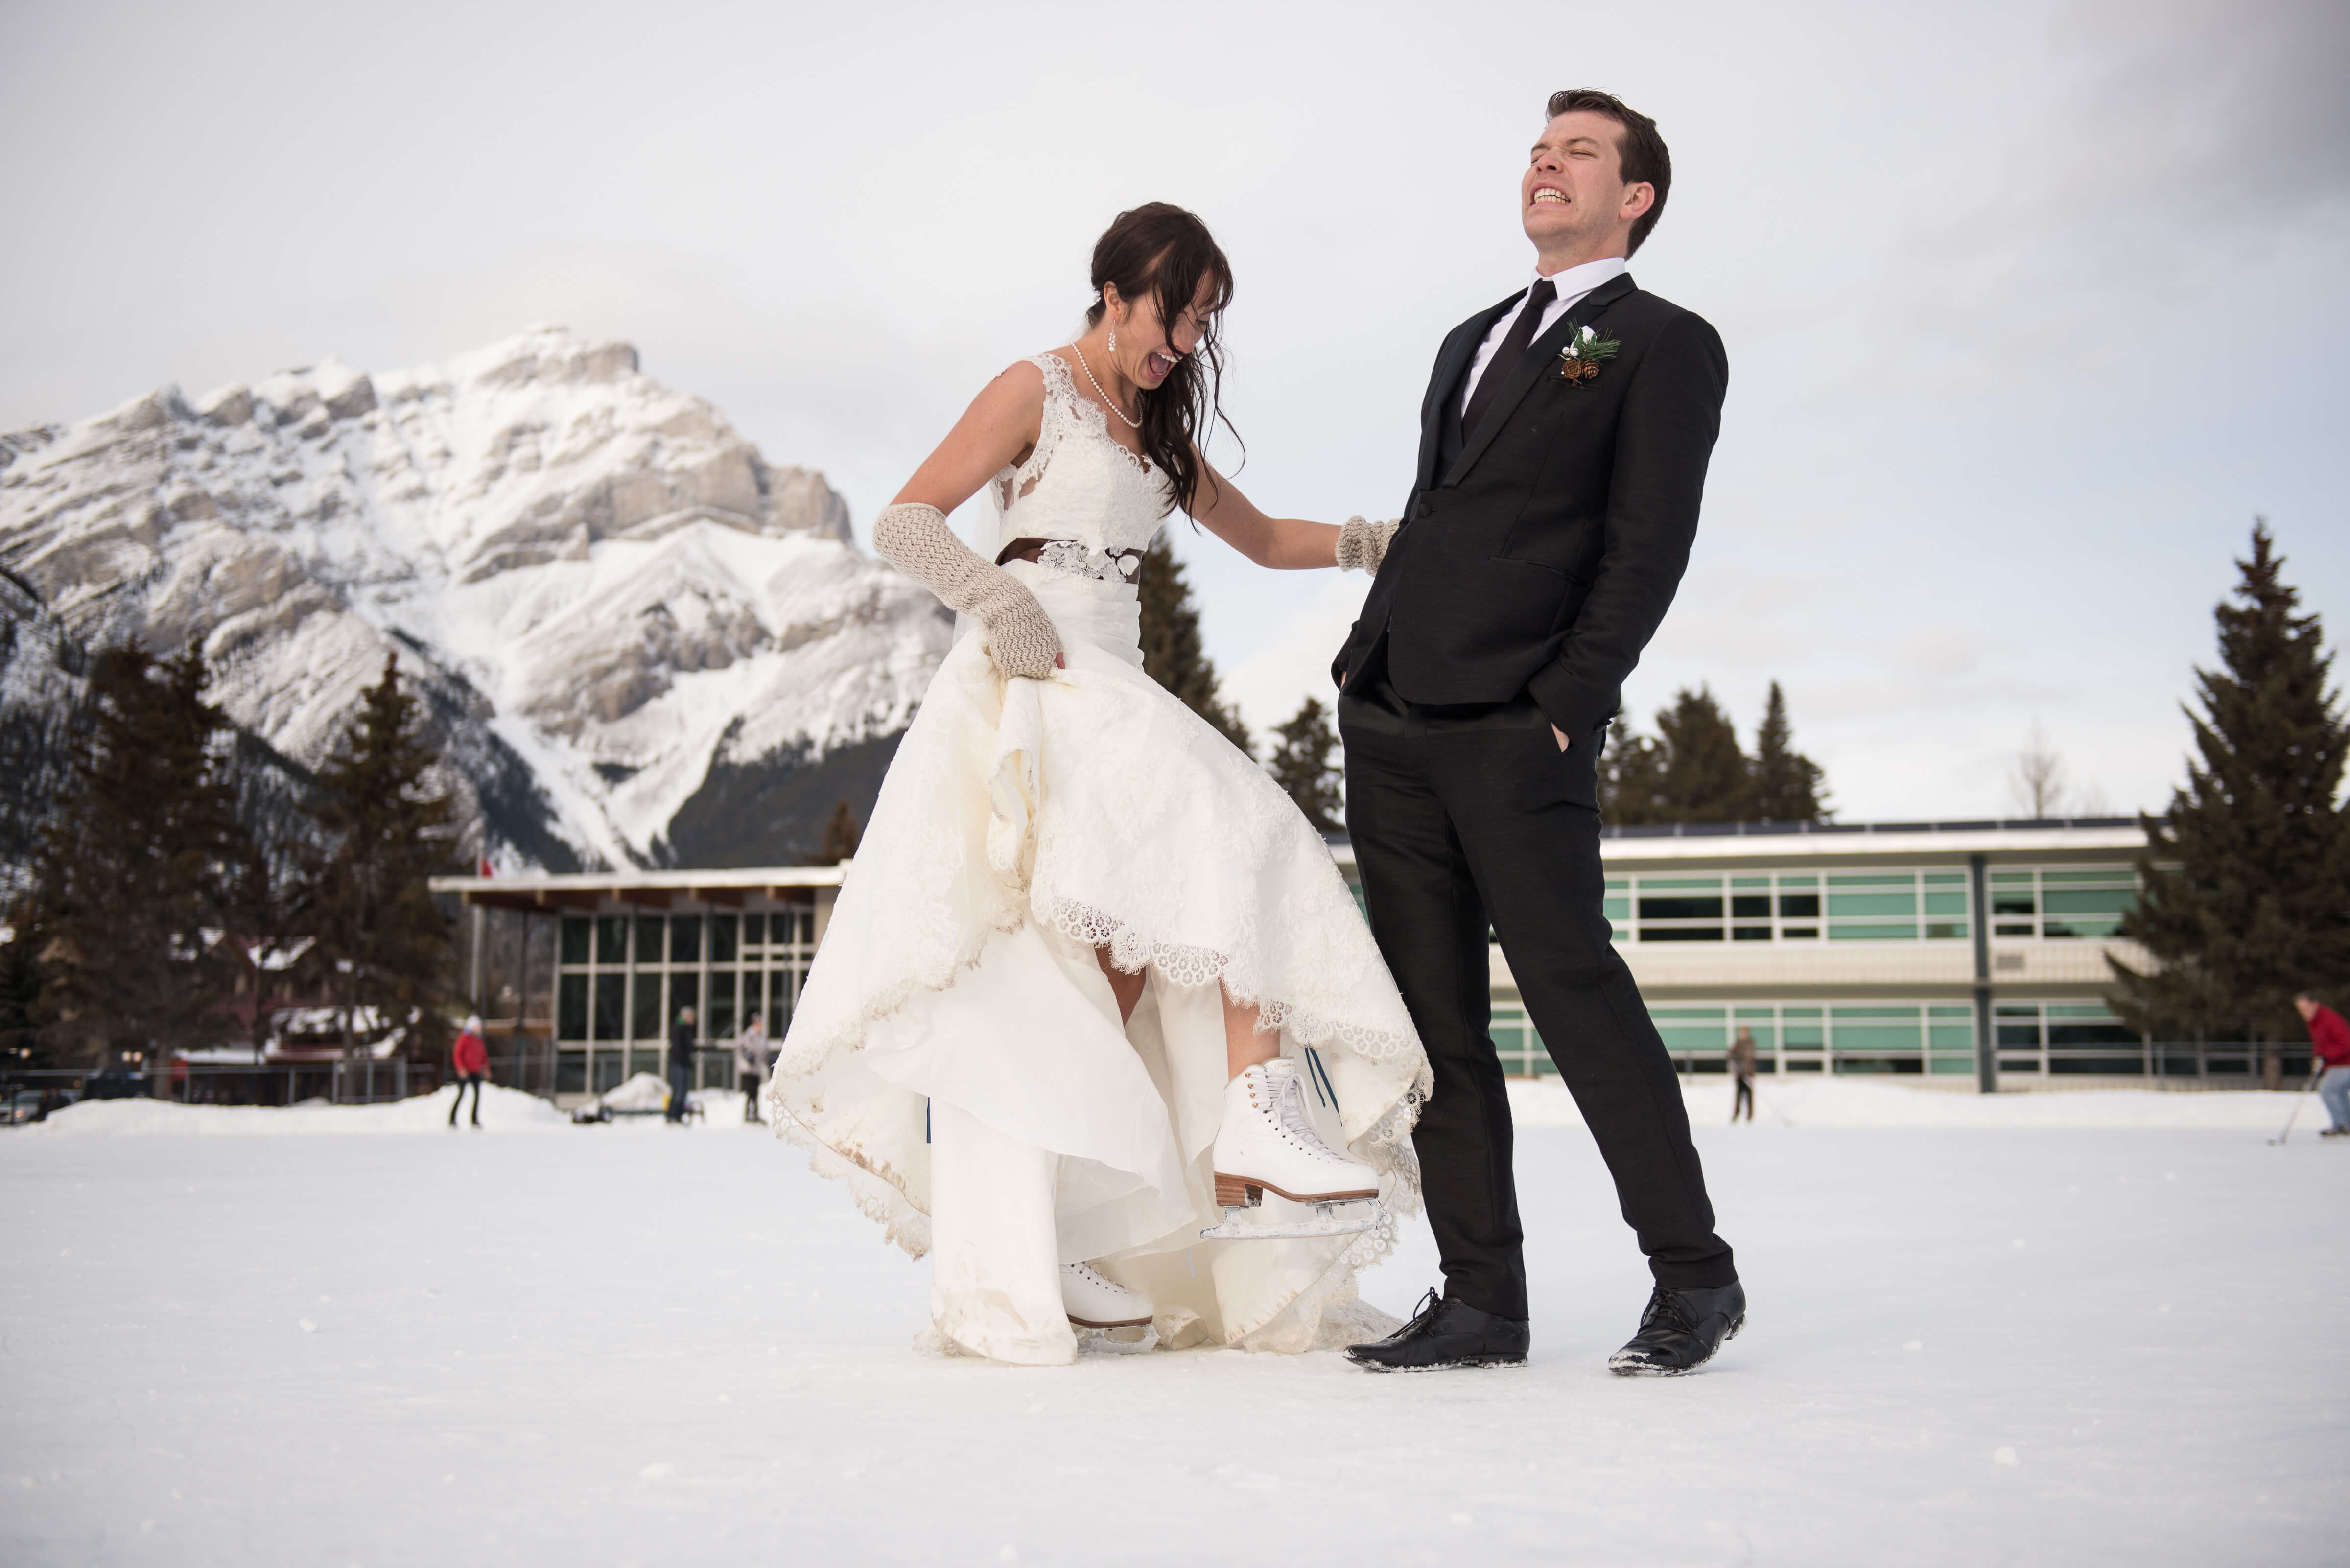 Breanna & Tom's Wedding Photo, they are standing outside in the snow, Breanna is wearing skates.